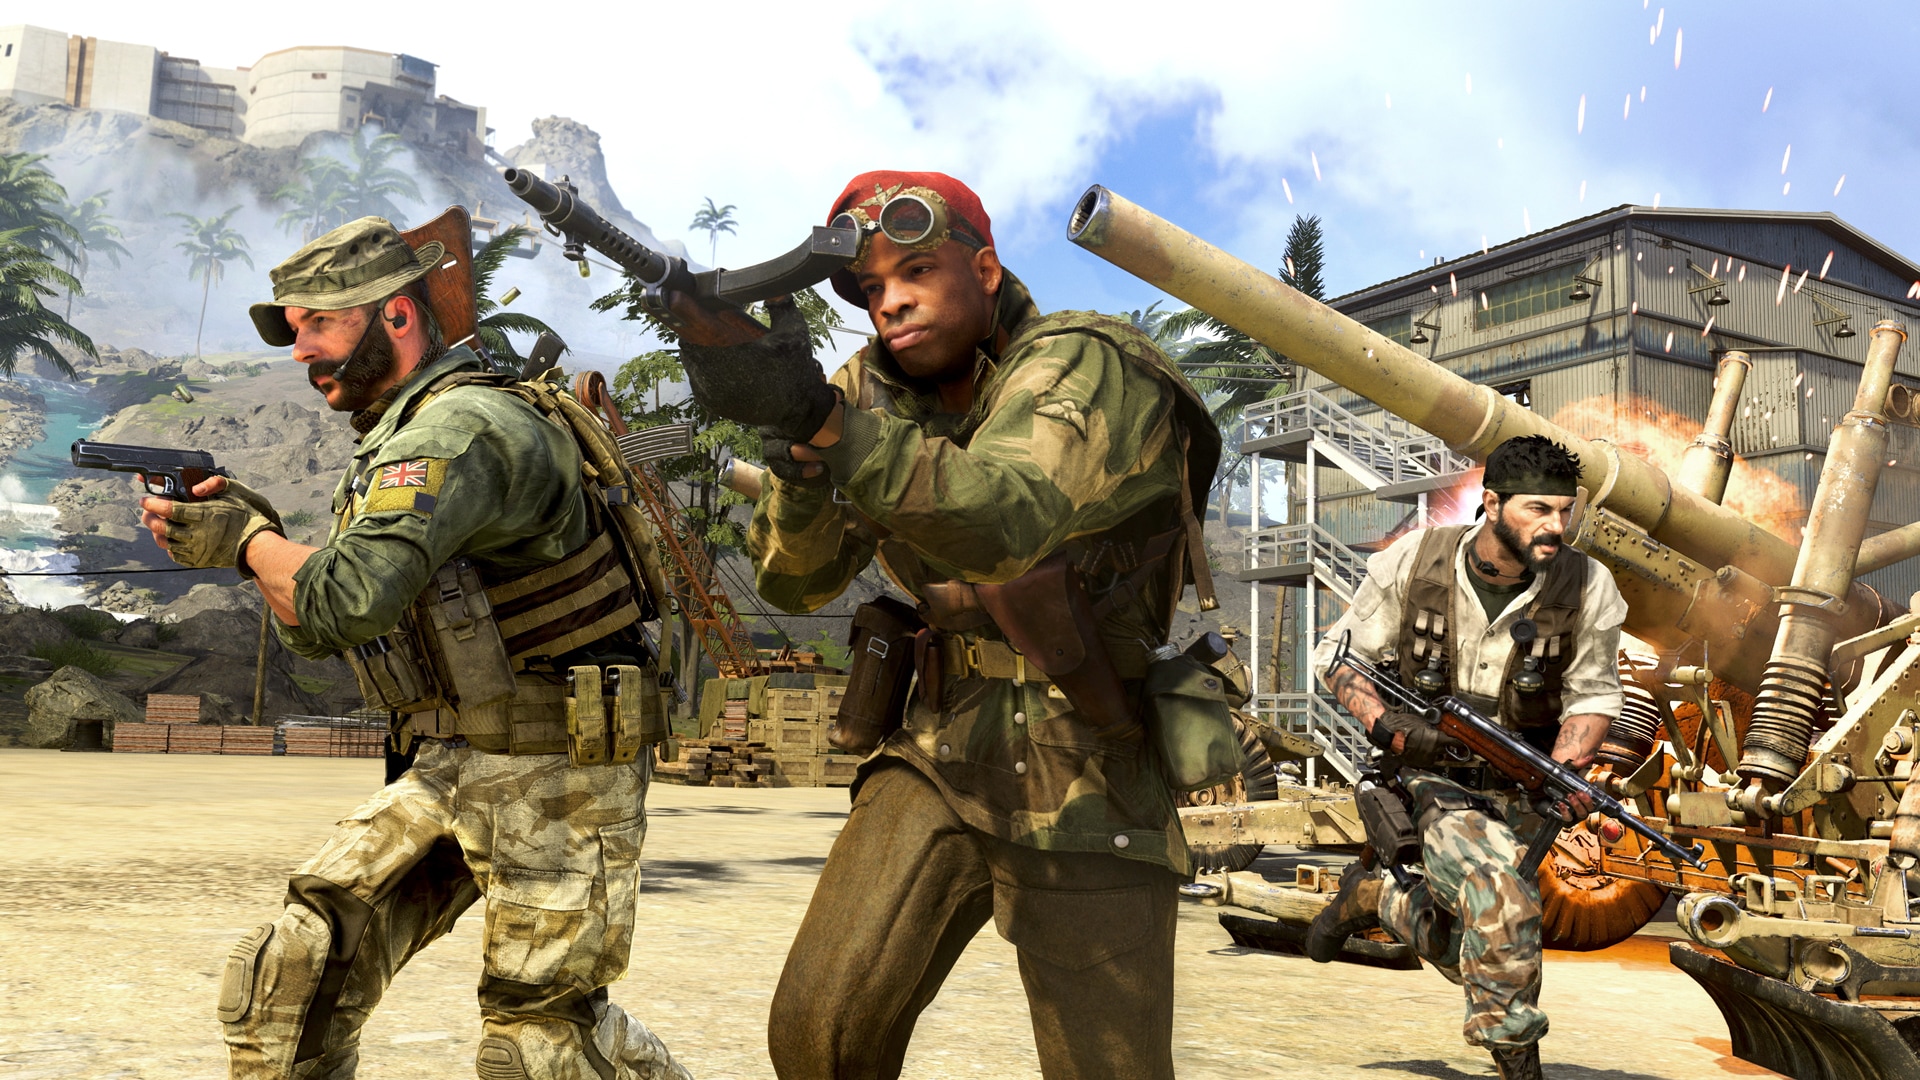 Call of Duty® Community Update: A Warzone™ Special Briefing for Our Players